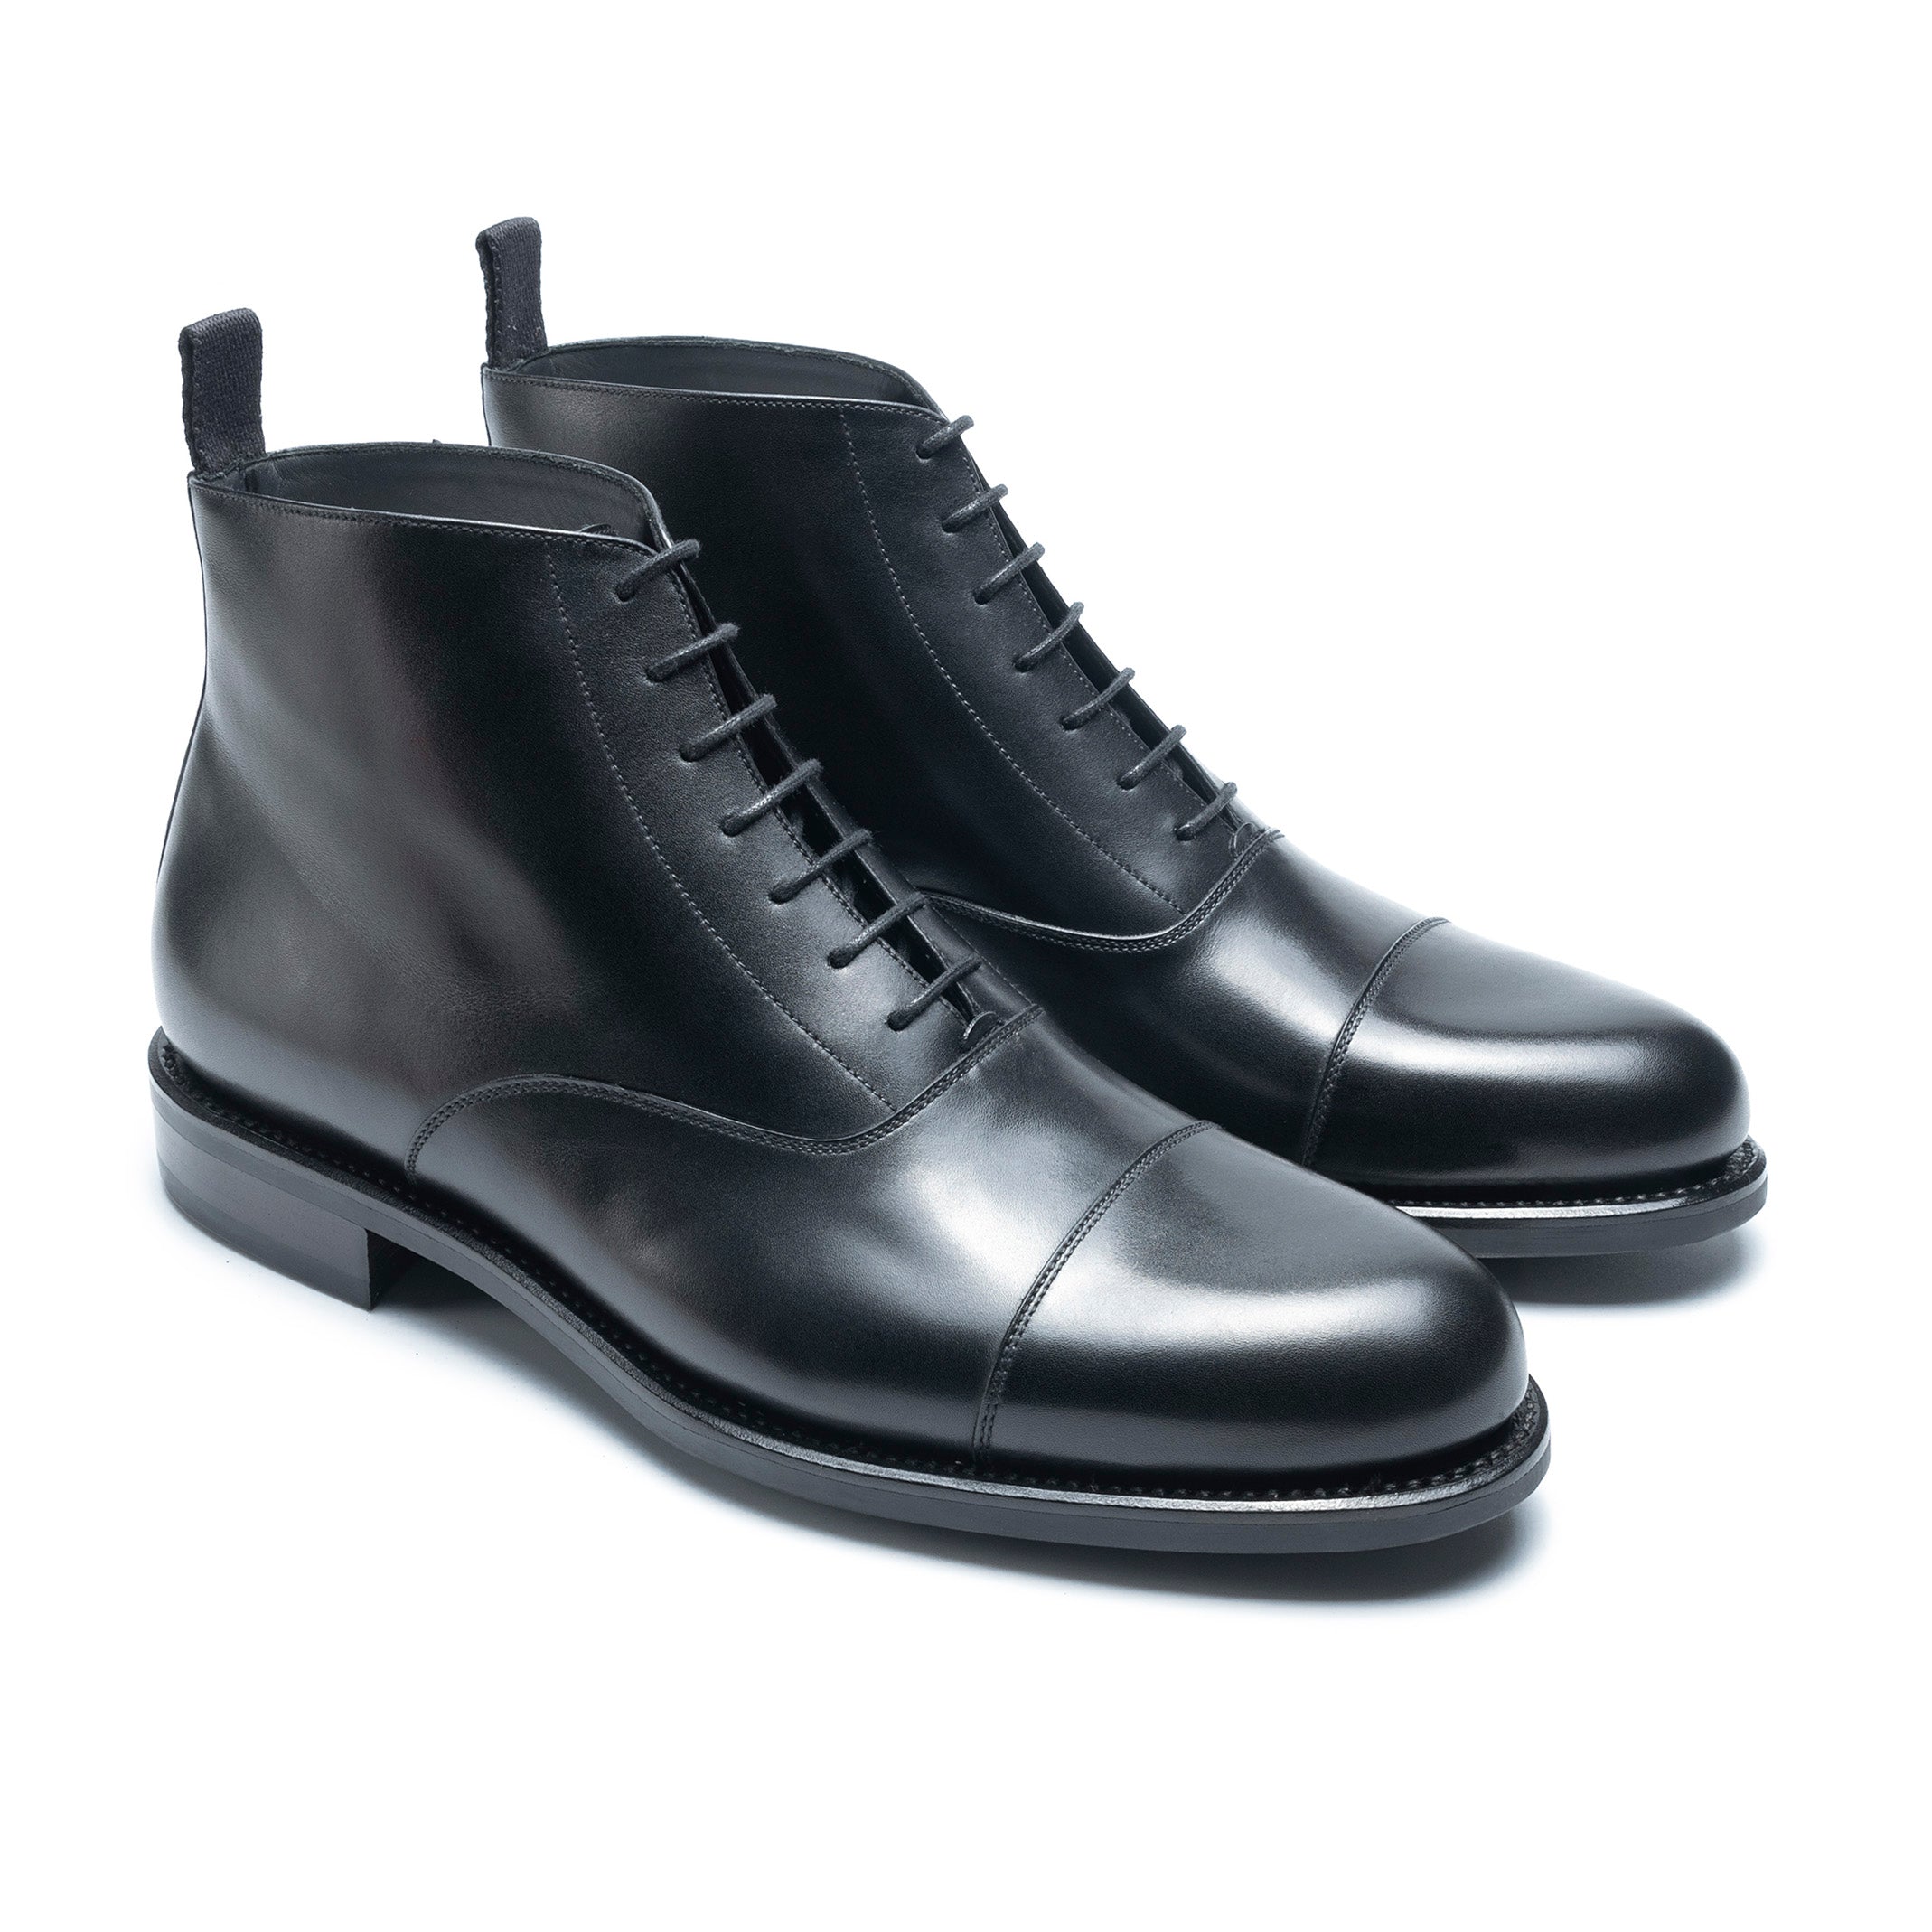 TLB Mallorca | Men's Boots made of leather | Men's Shoes | model ...